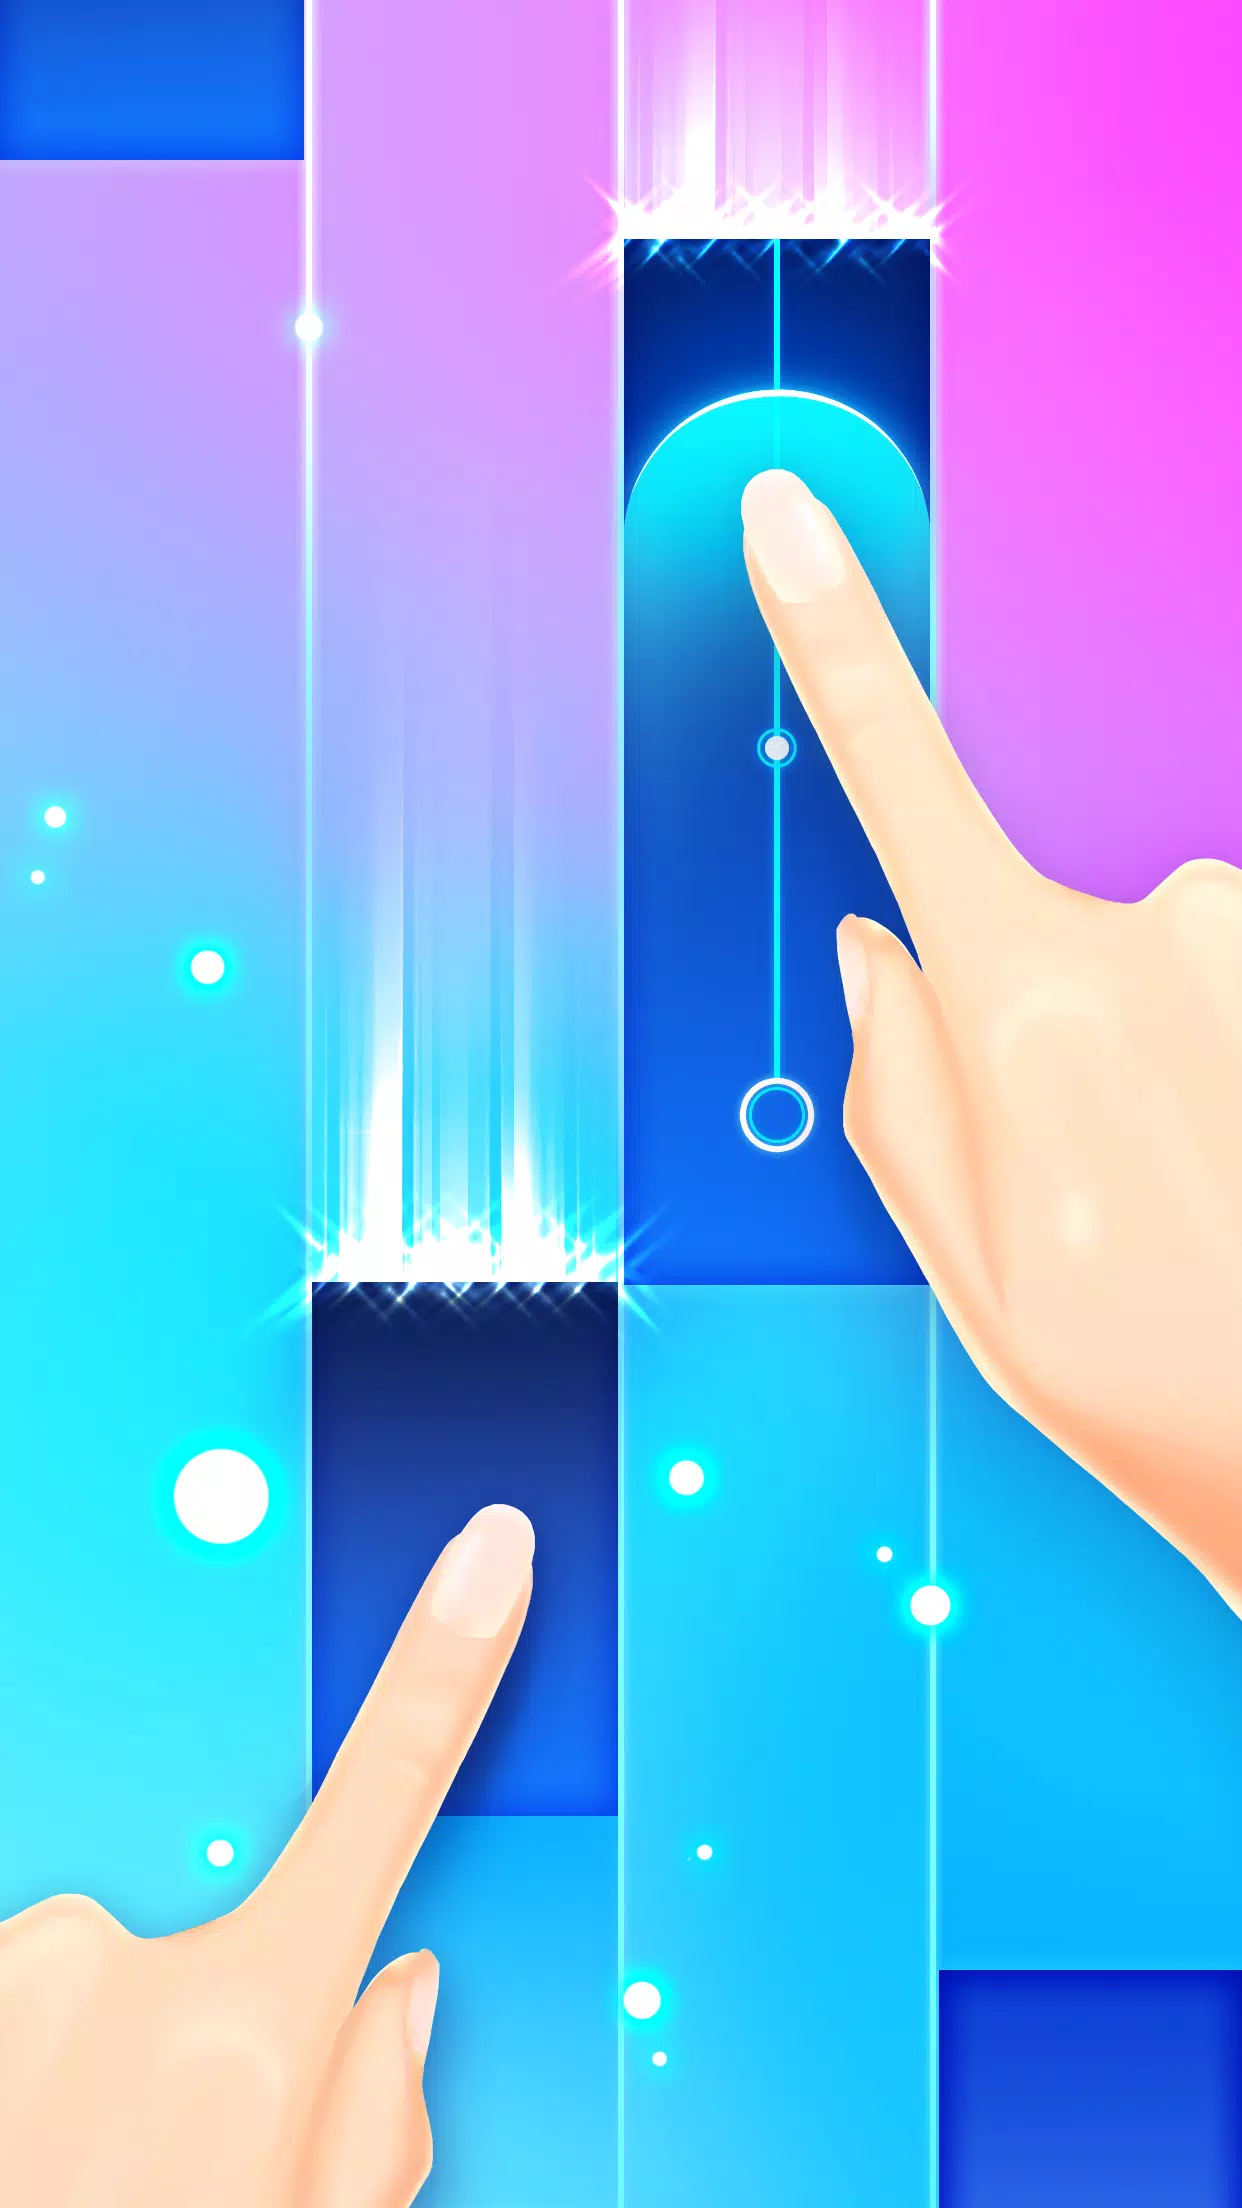 2022 Fun Piano Music Game with Edm Songs! Tap tiles non-stop